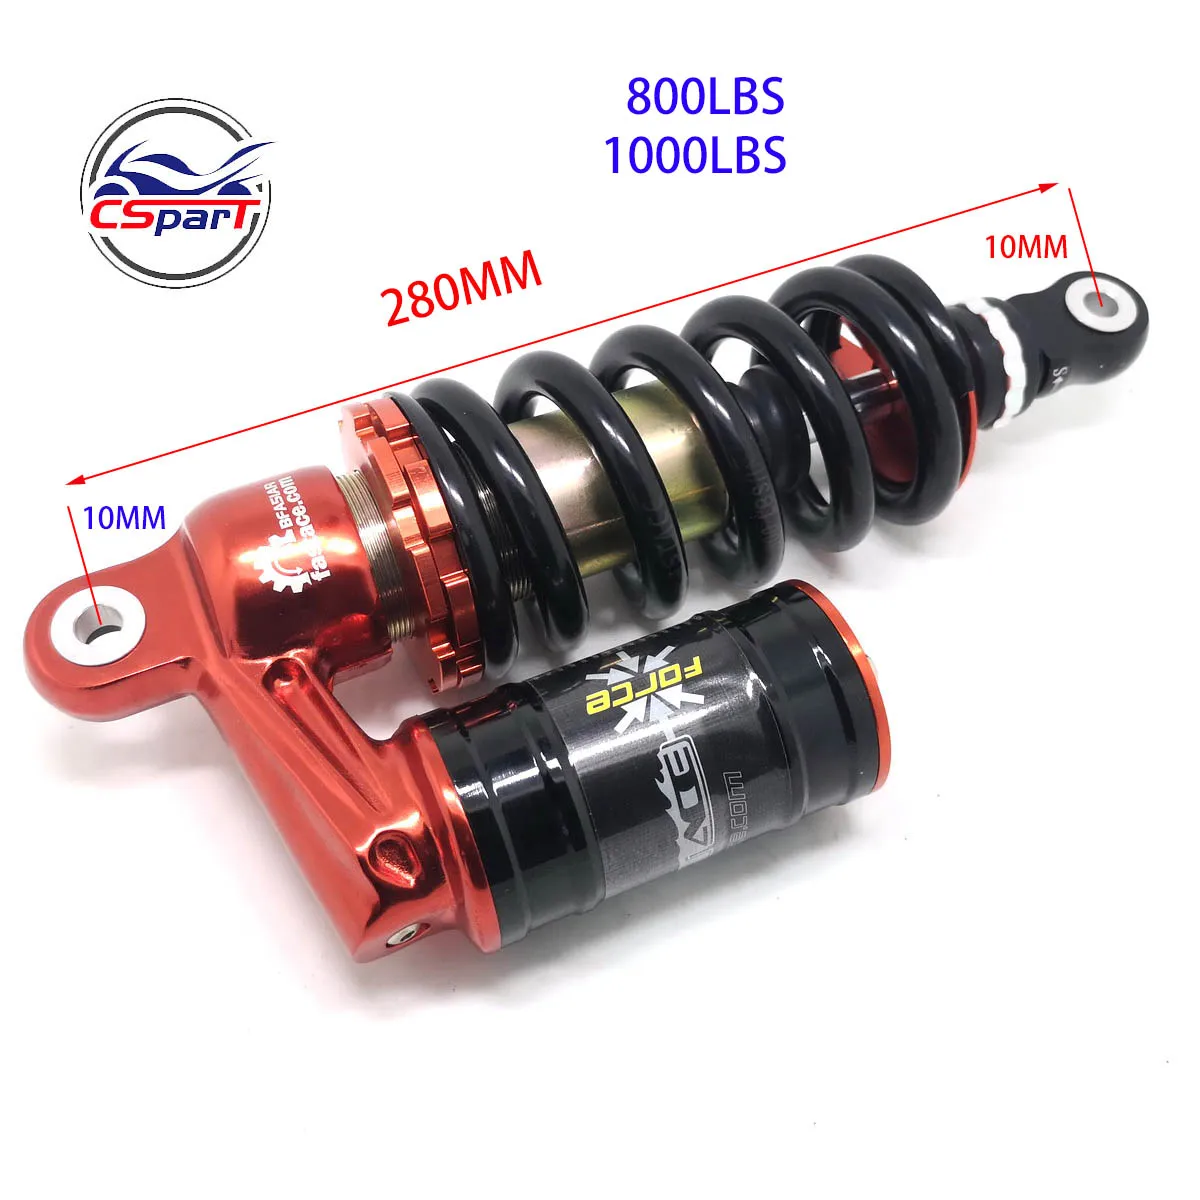 280mm Rear Gas Shock Absorber for 50 cc 70cc 110 cc 125cc Dirt Motorbikes Pit Motorbike